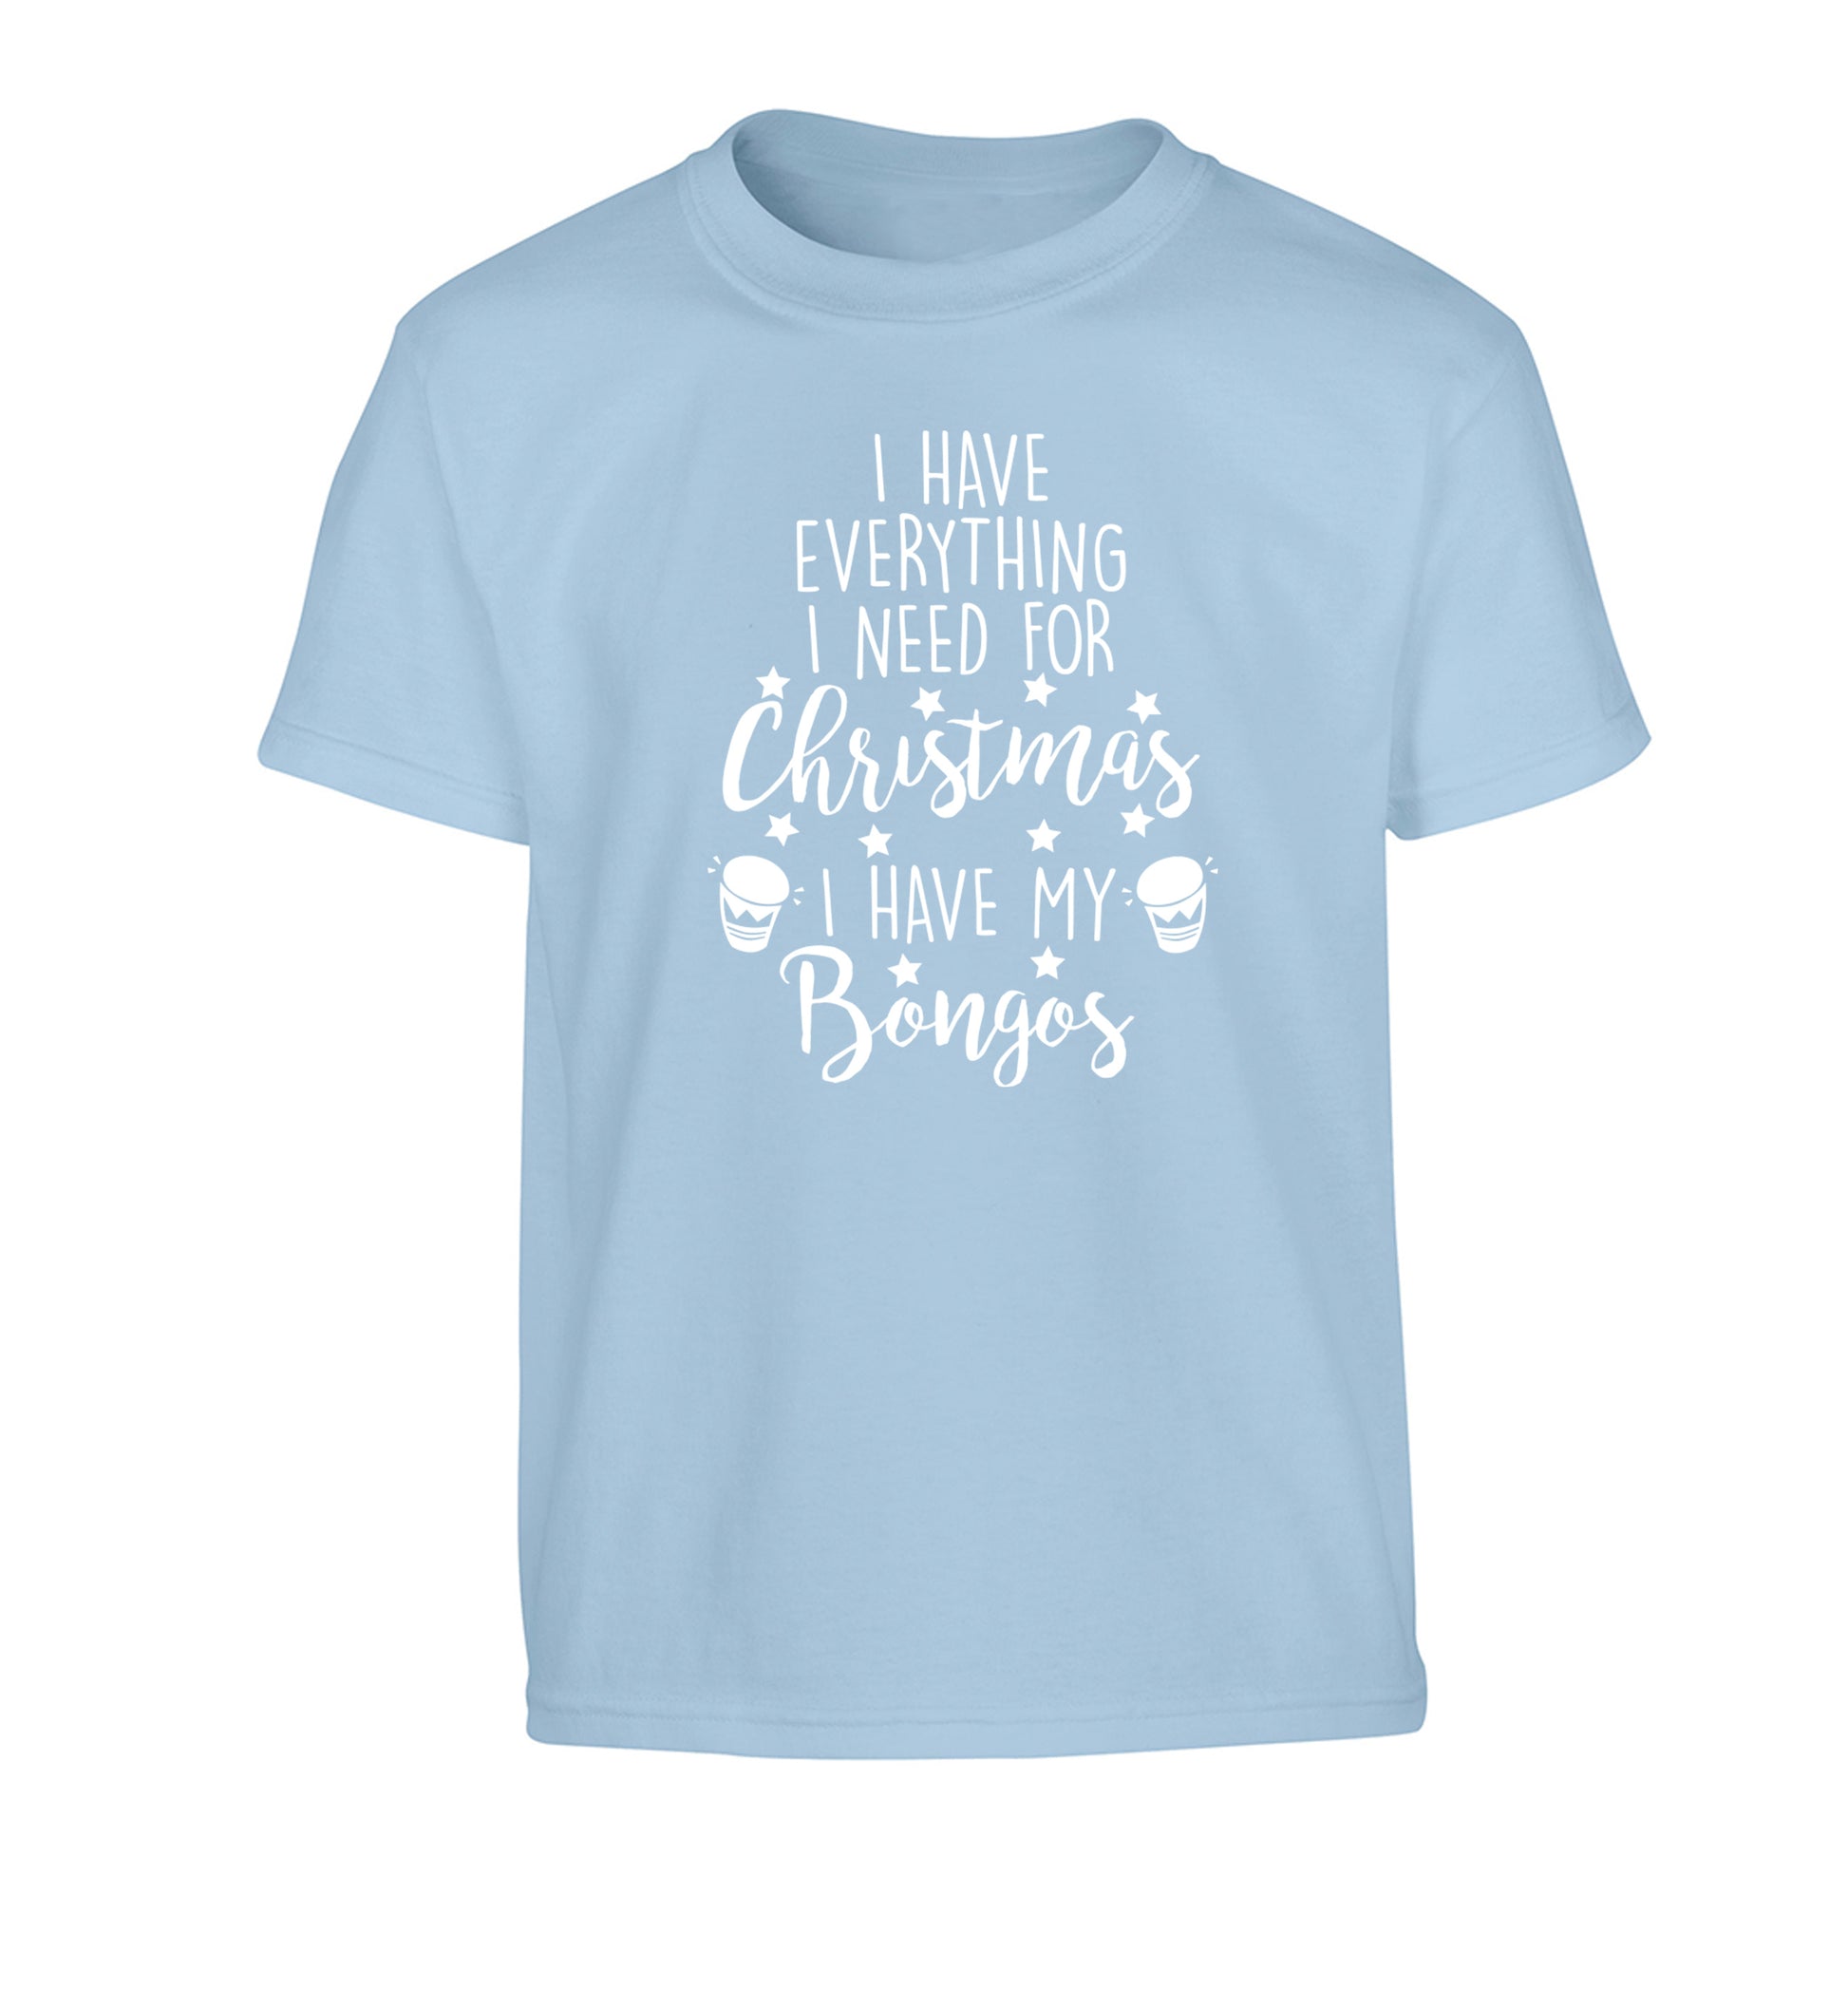 I have everything I need for Christmas I have my bongos! Children's light blue Tshirt 12-14 Years